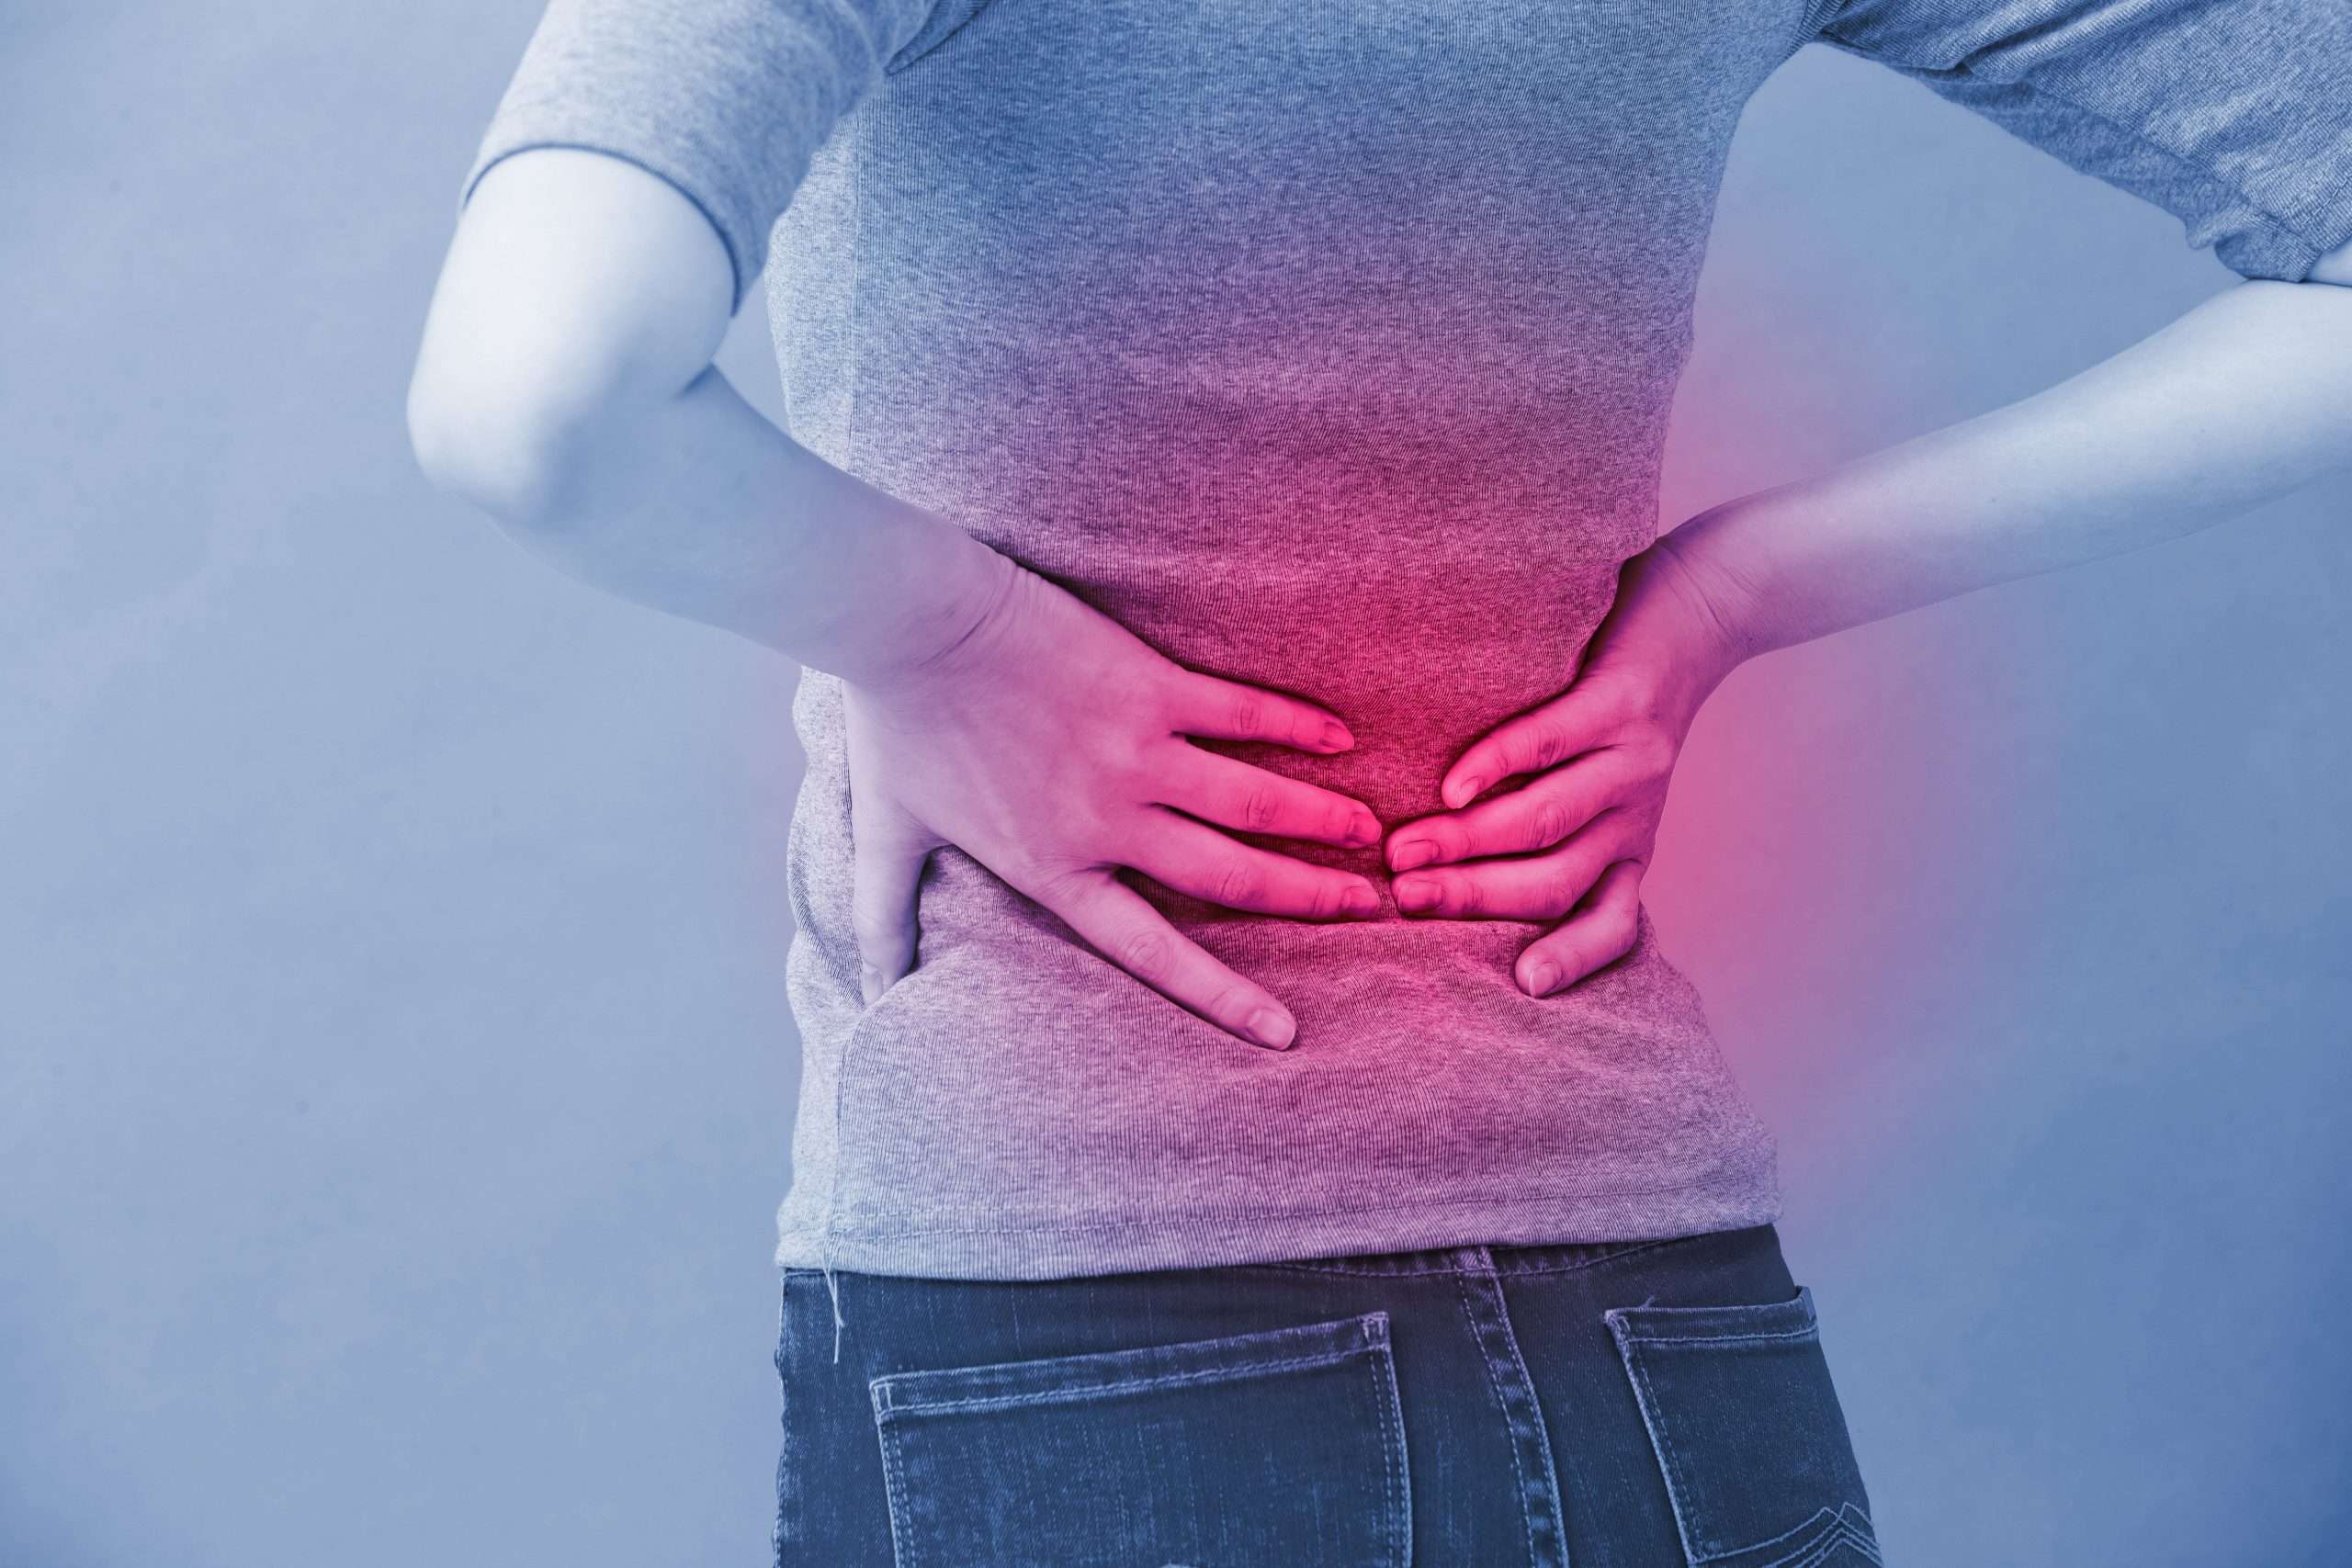 Kidney Pain and What It Can Mean